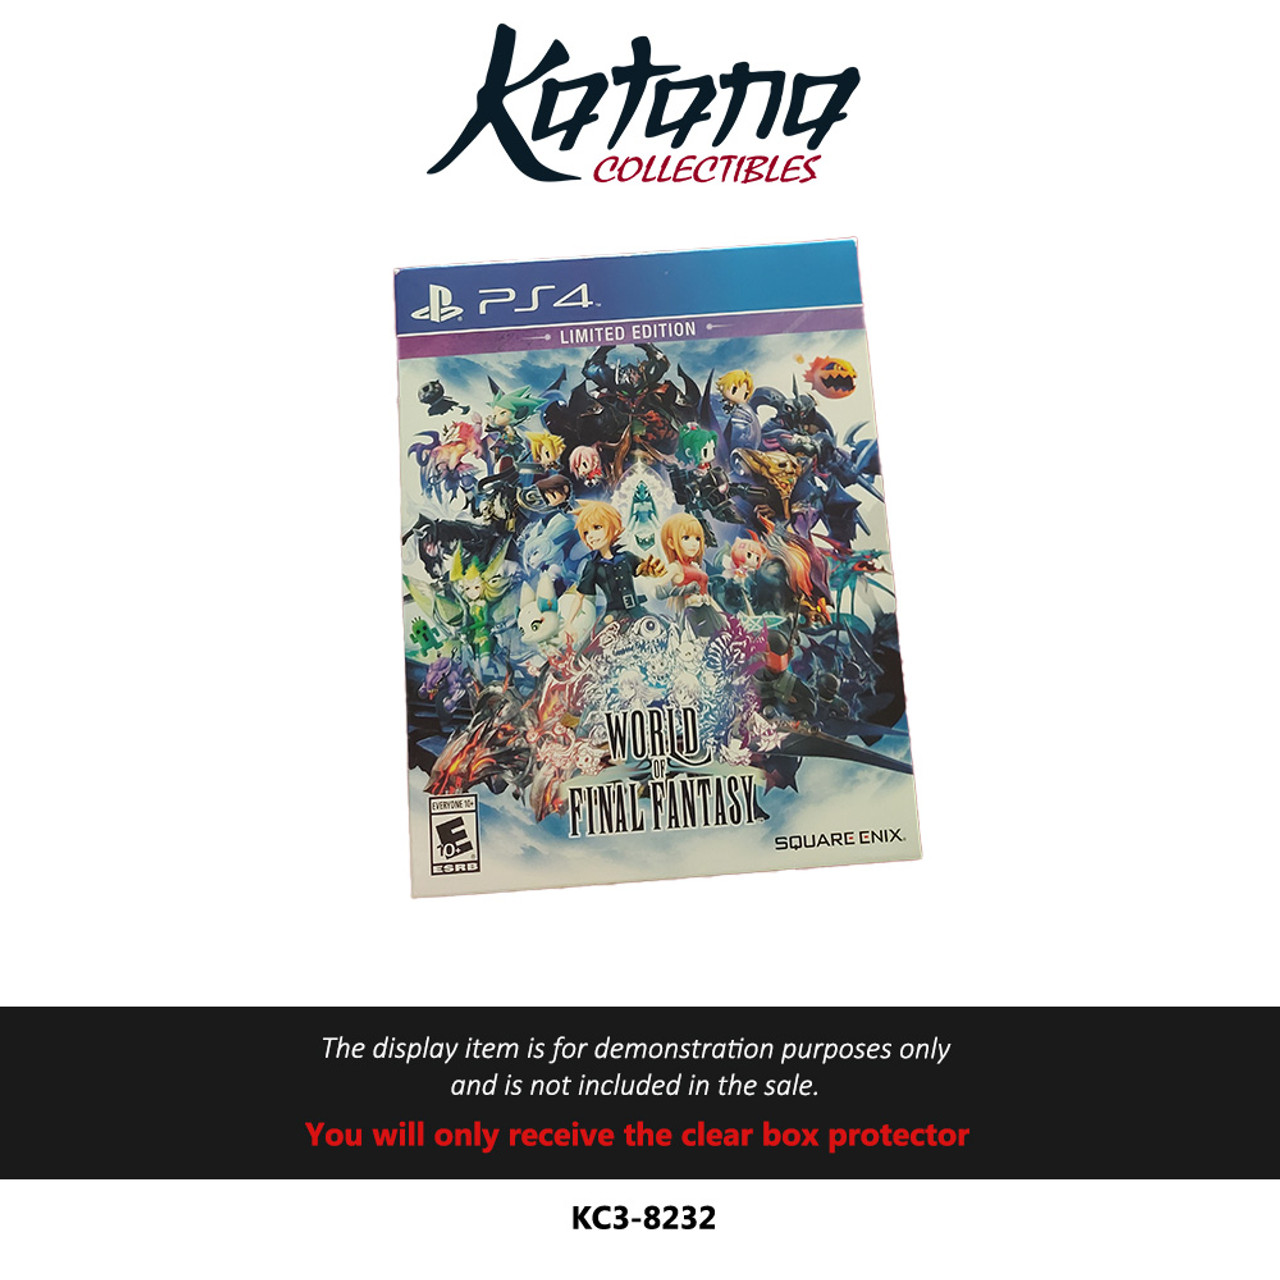 Katana Collectibles Protector For PS4 World of Final Fantasy Limited Edition